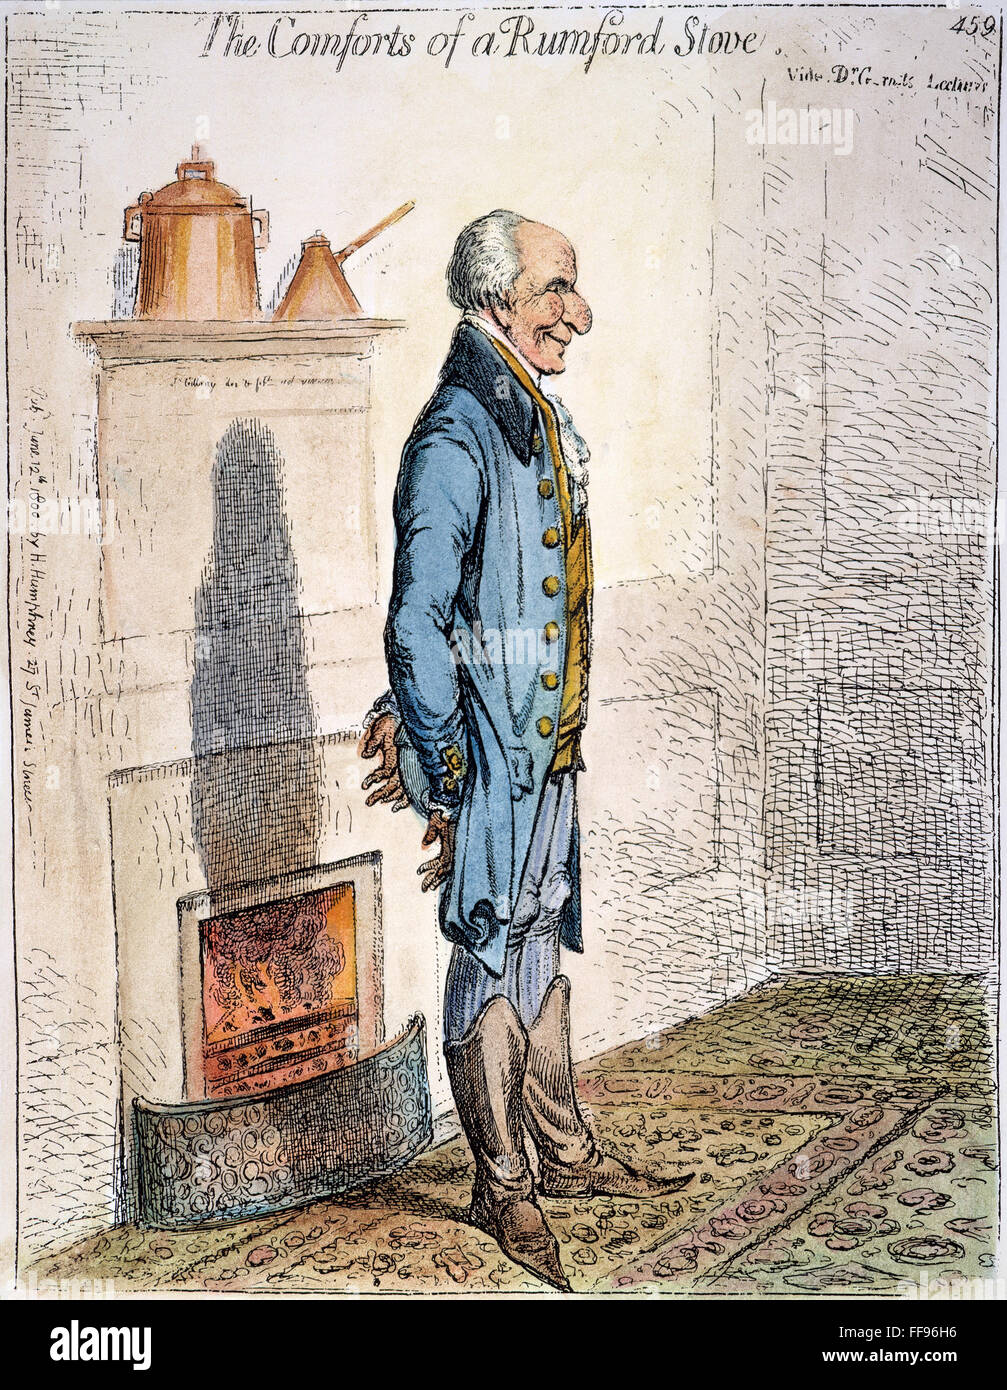 BENJAMIN THOMPSON /n(1753-1814). Count Rumford. American physicist and inventor. 'The comforts of a Rumford Stove.' Count Remford demonstrating the efficiency of his improved fireplace design. Caricature etching, 1800, by James Gillray. Stock Photo